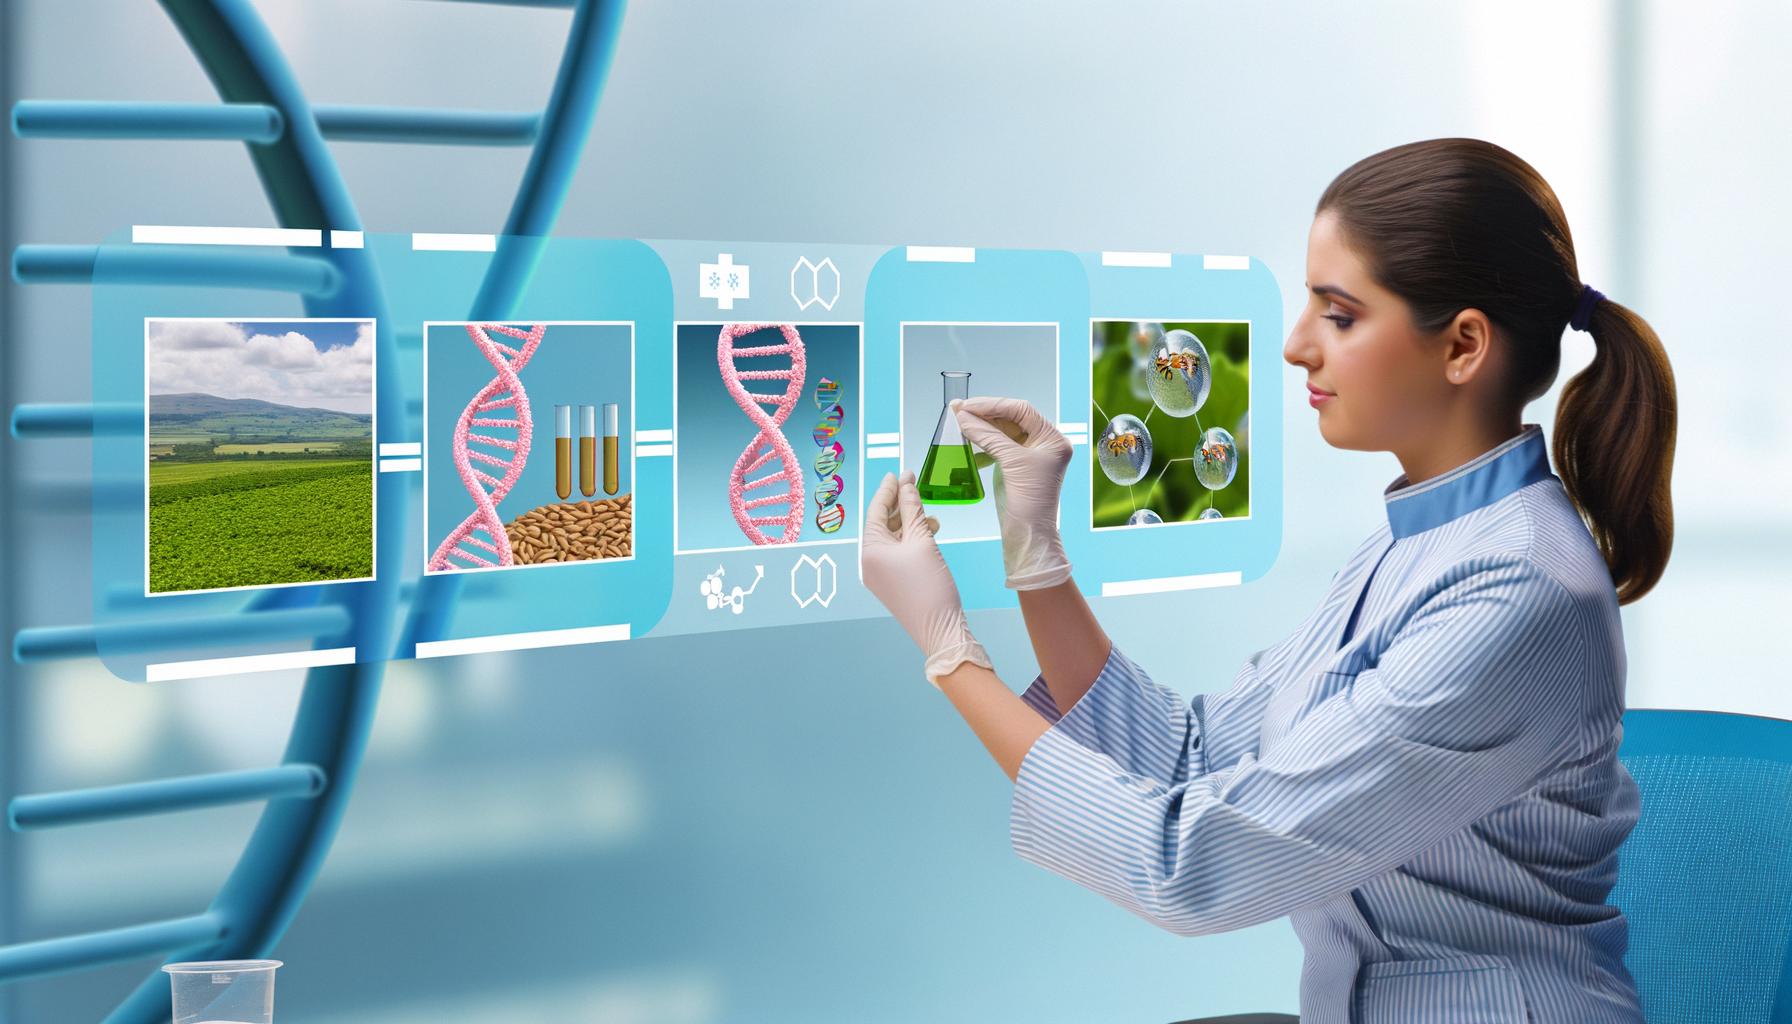 Genetic engineering offers solutions to medical and environmental challenges